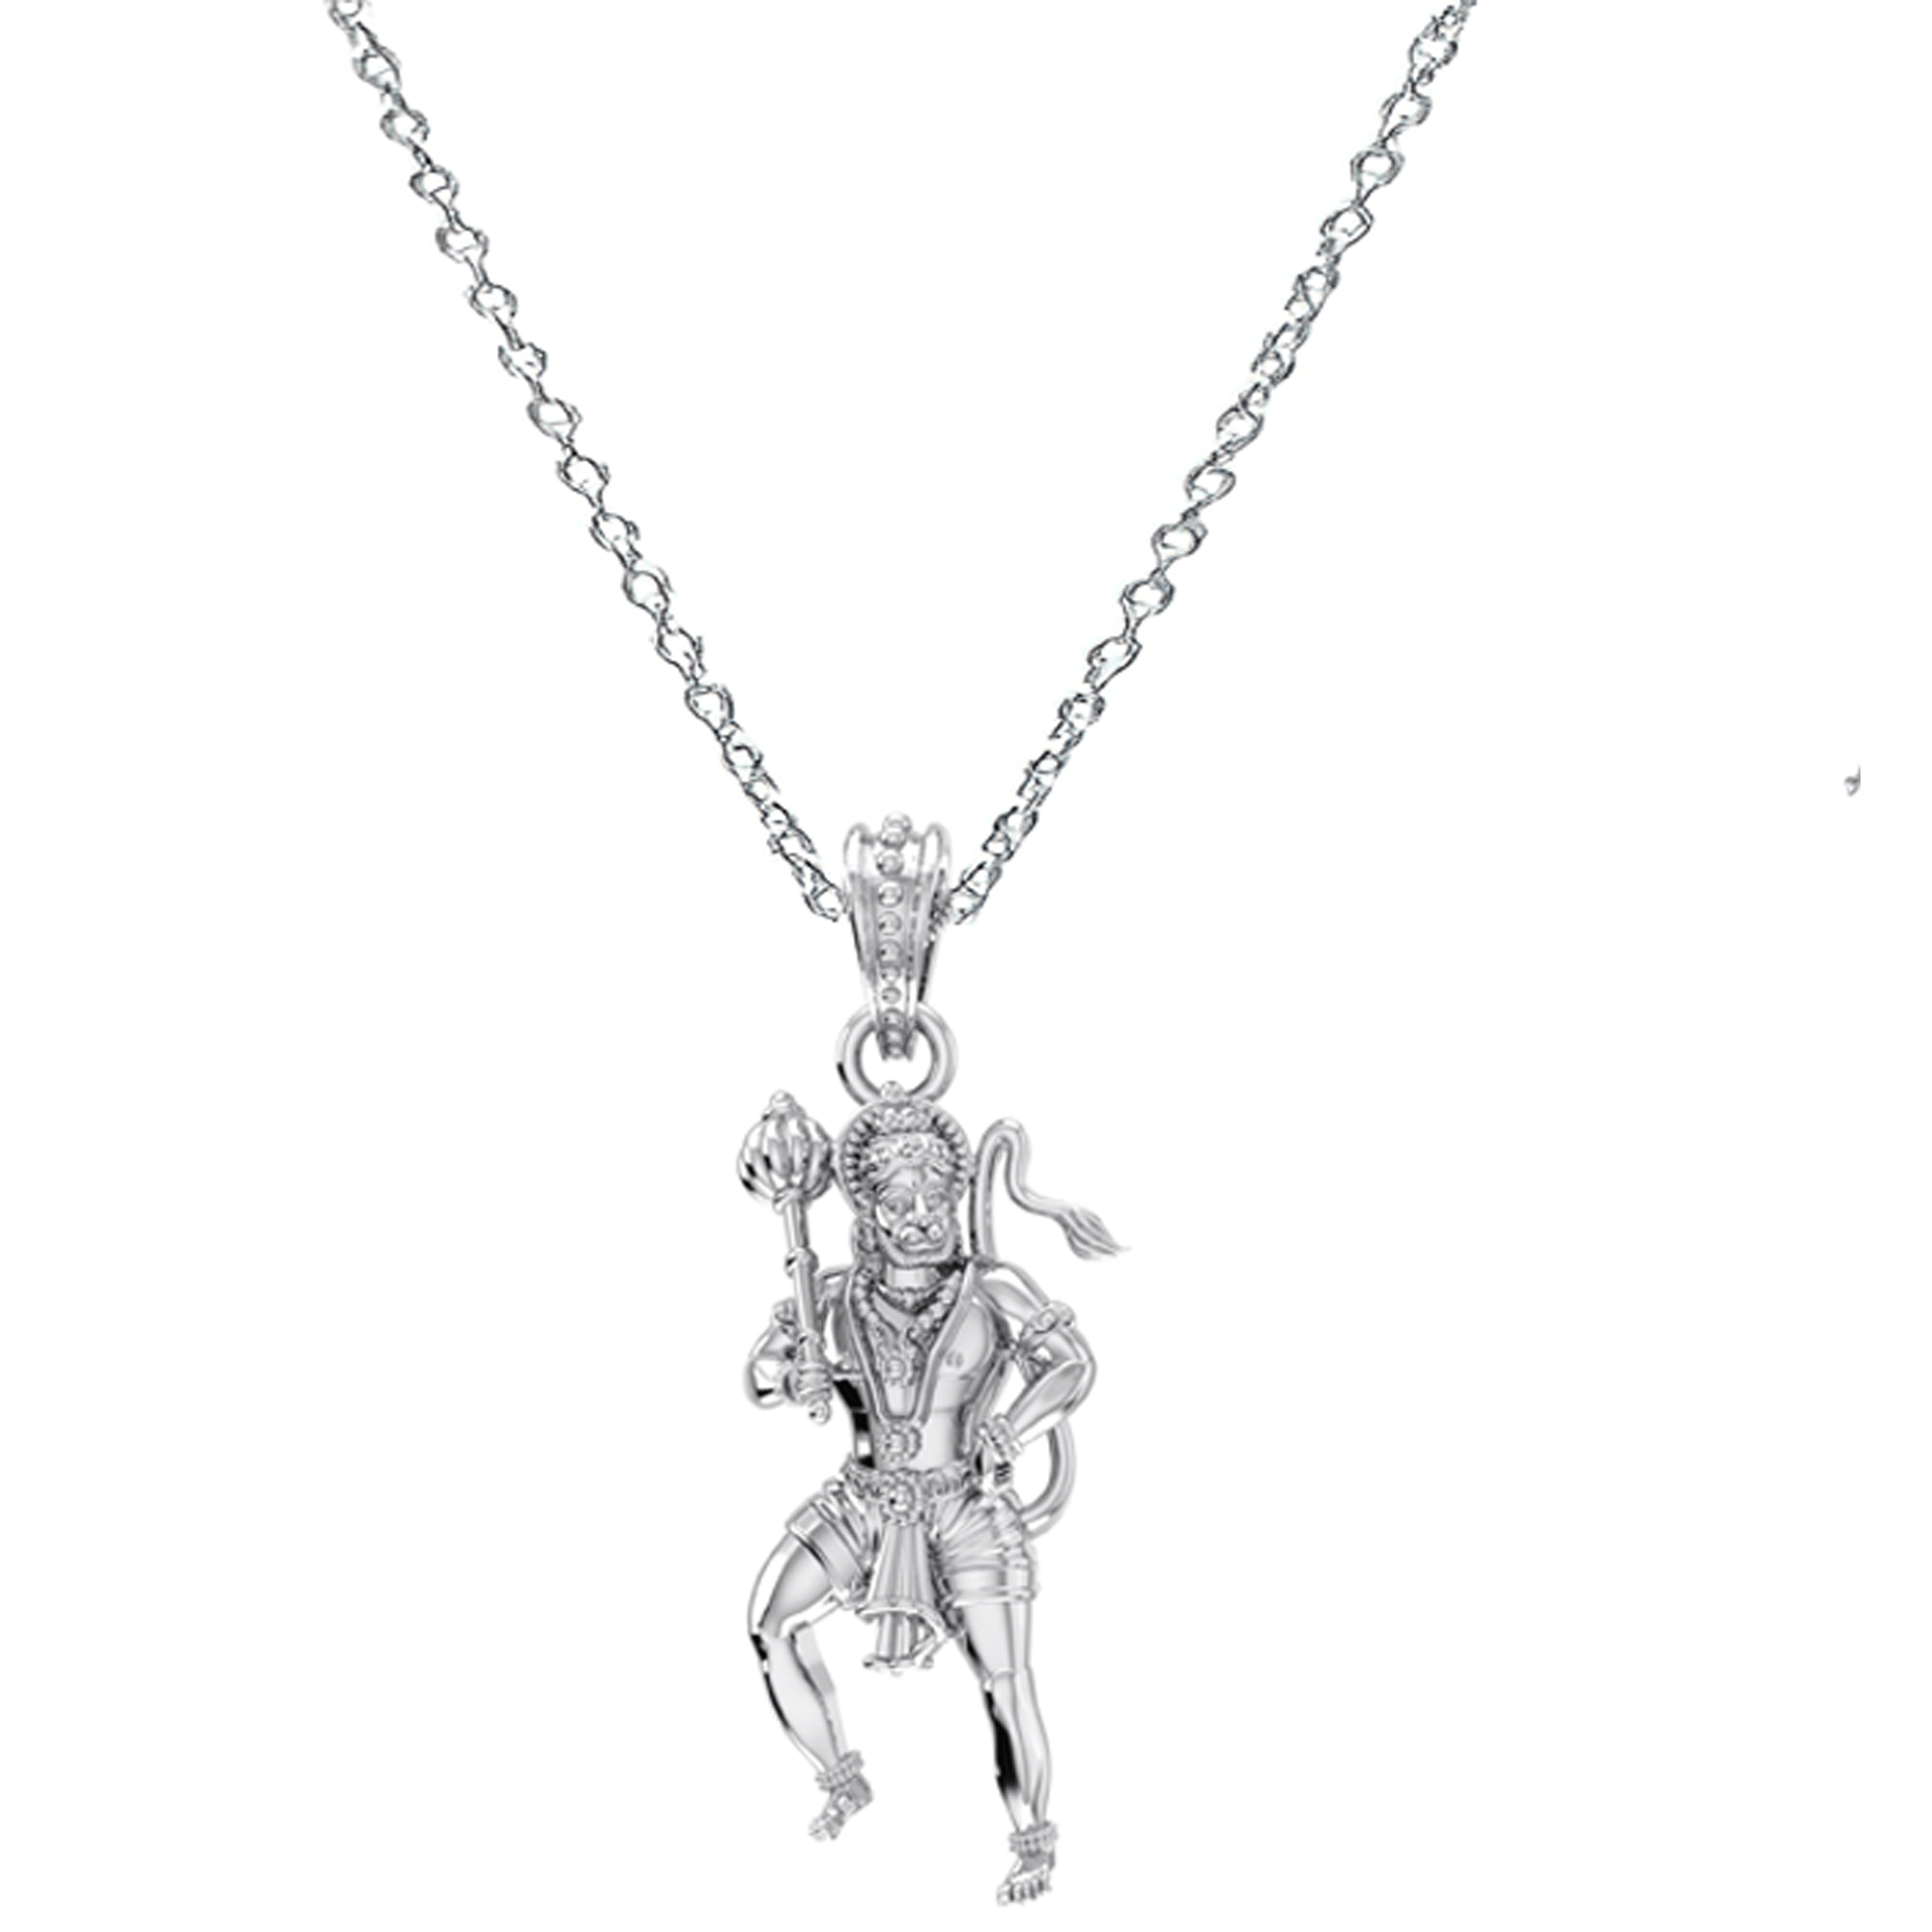 God Hanuman Chain Pendant (Pendant with Anchor Chain- 22 inches) for Men & Women Pure Silver Lord bajrang bali Chain Locket for Good Health & Wealth